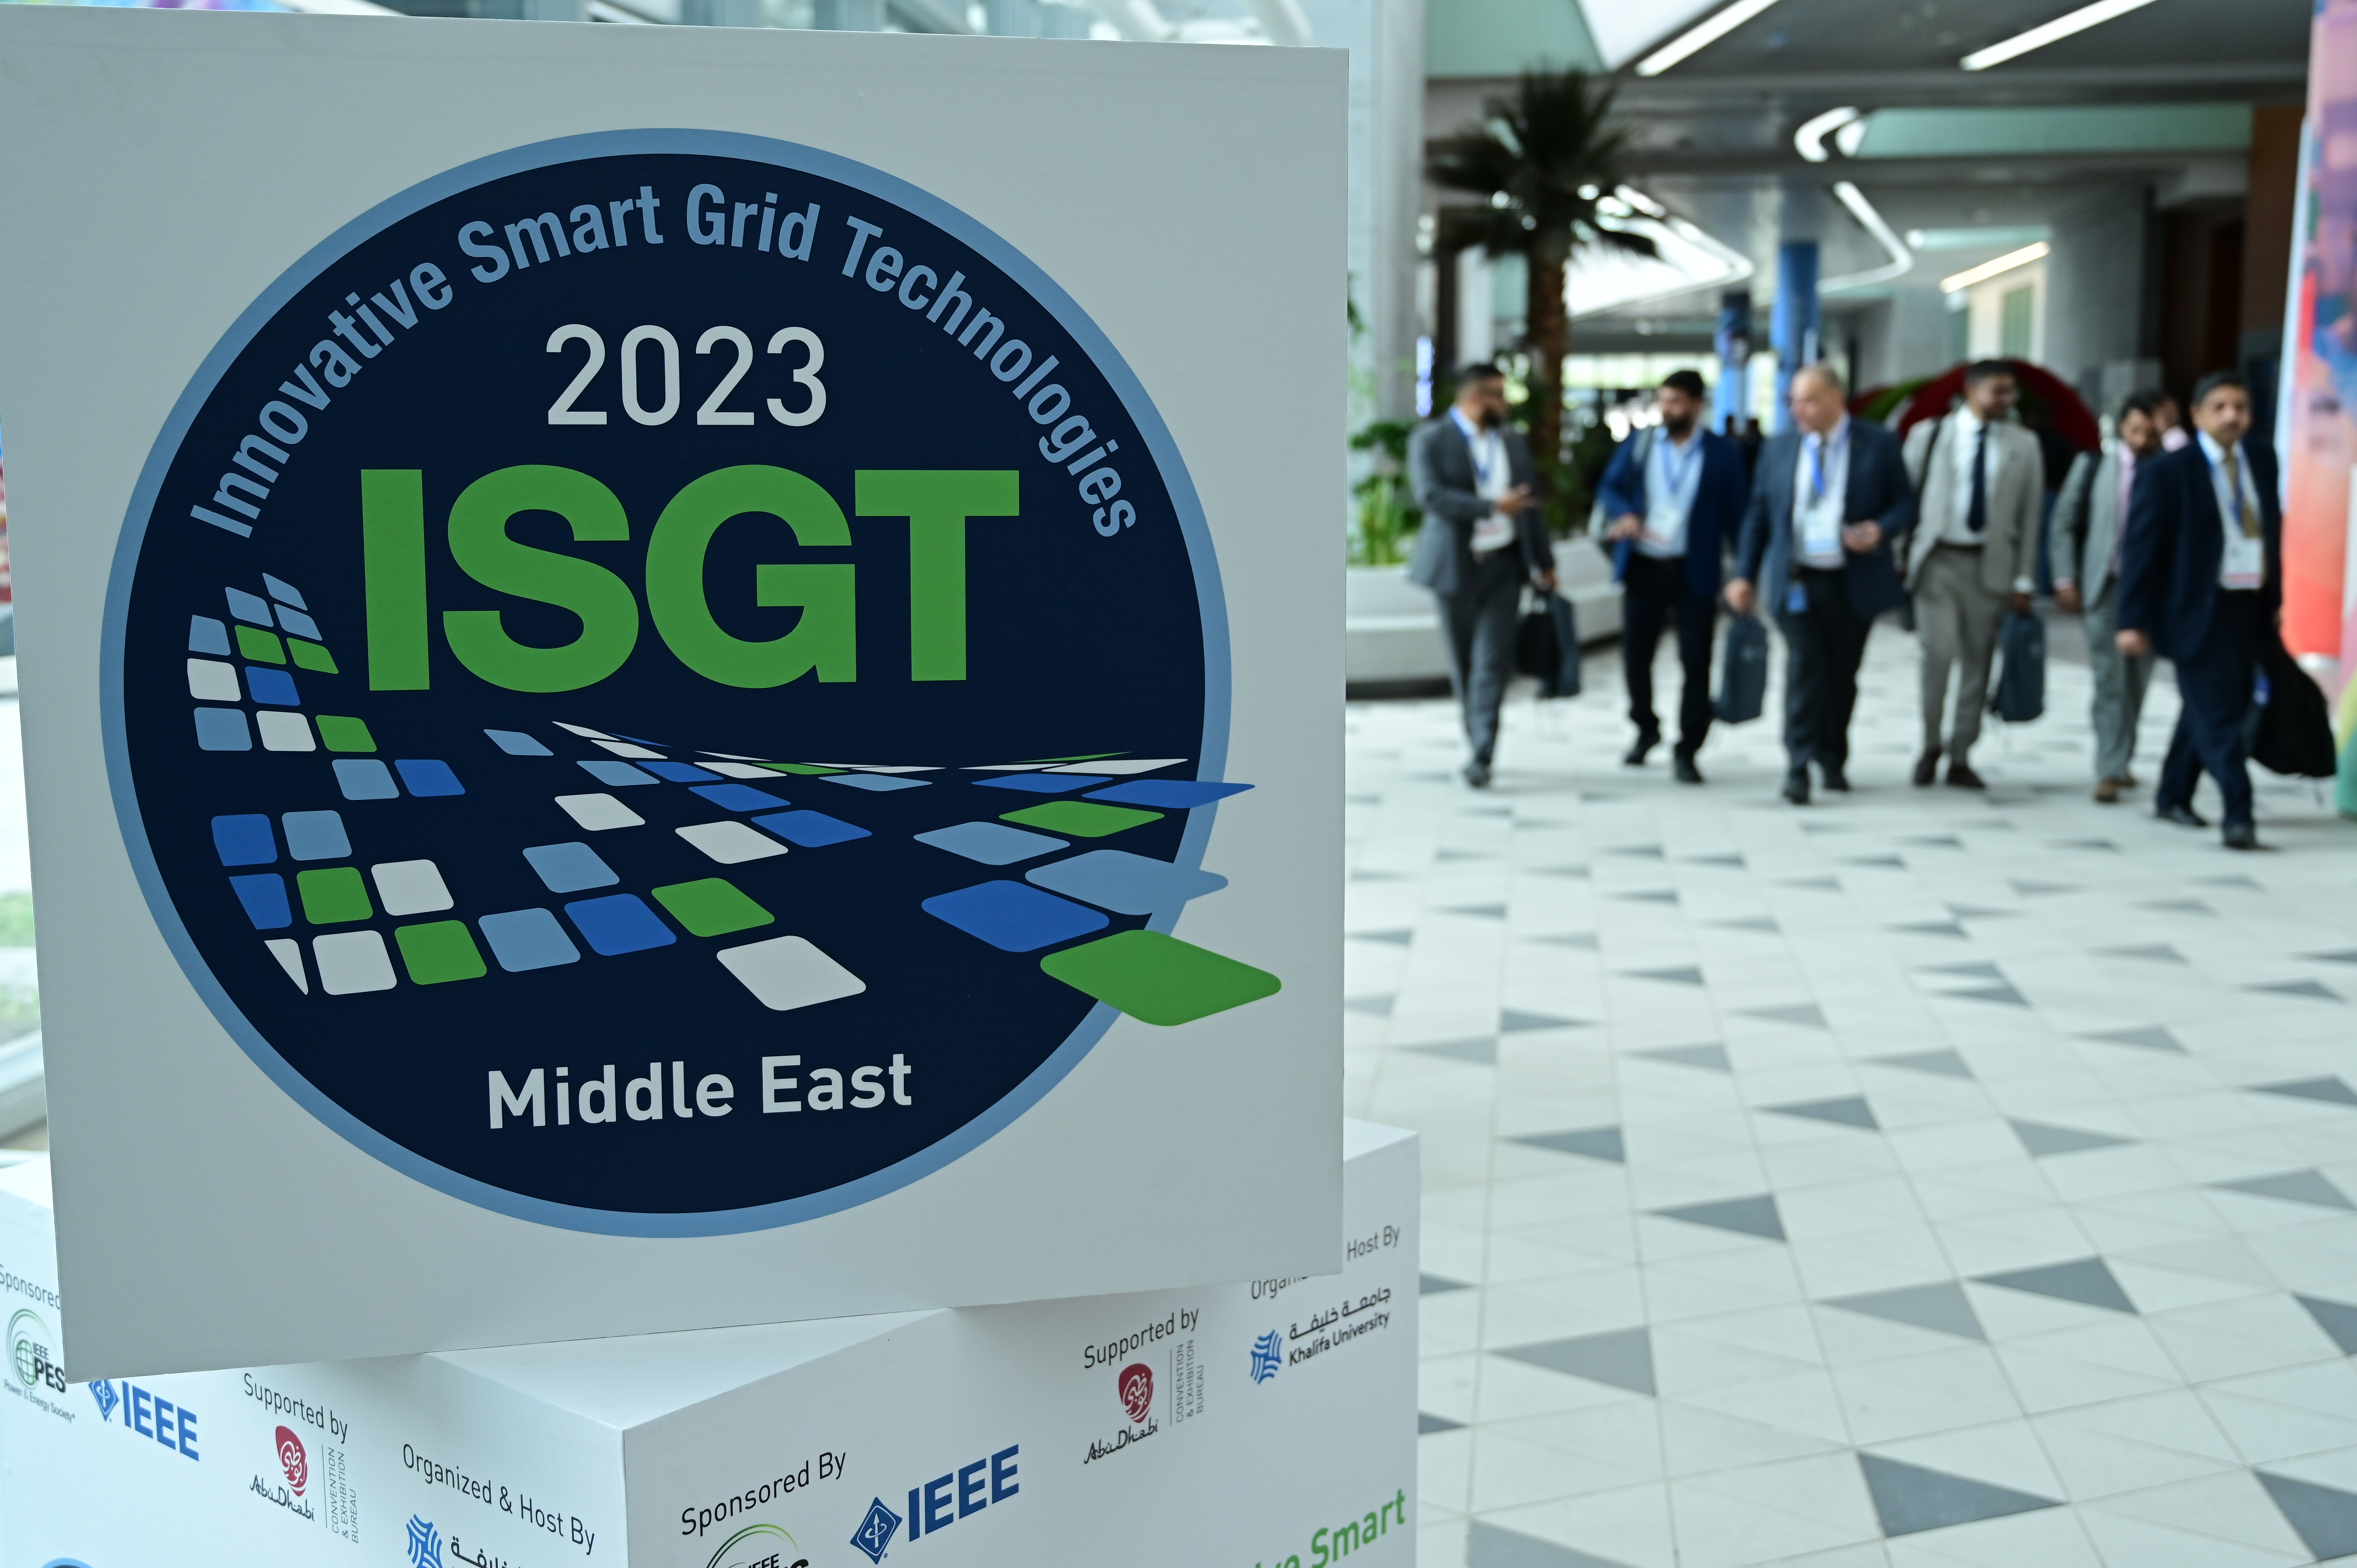 IEEE Innovative Smart Grid Technologies Middle East 2023 Conference Opens in Abu Dhabi